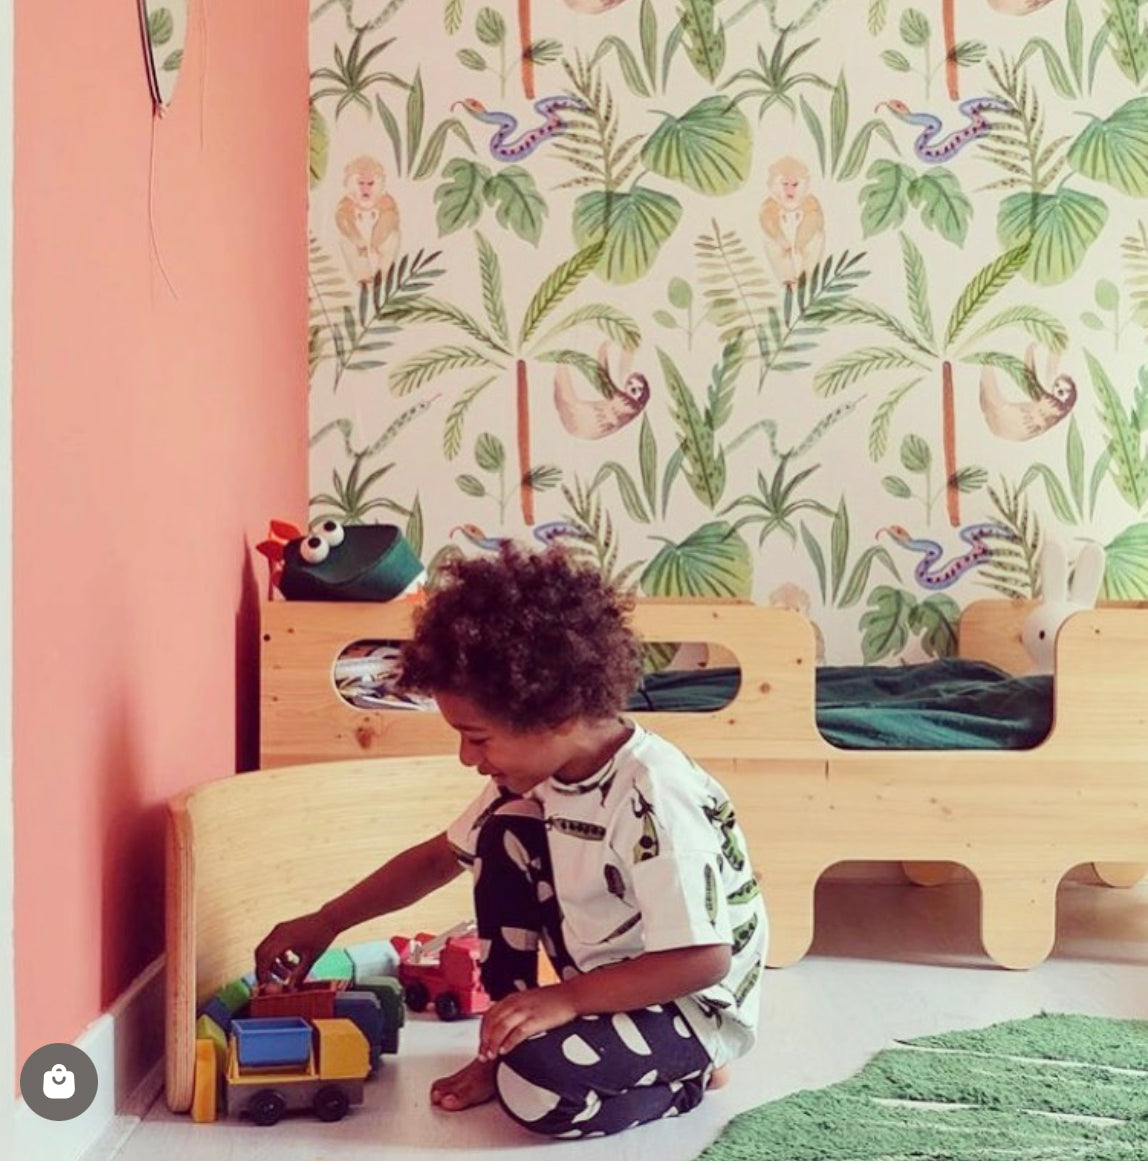 Child Playing with preschool toy trucks against a wall